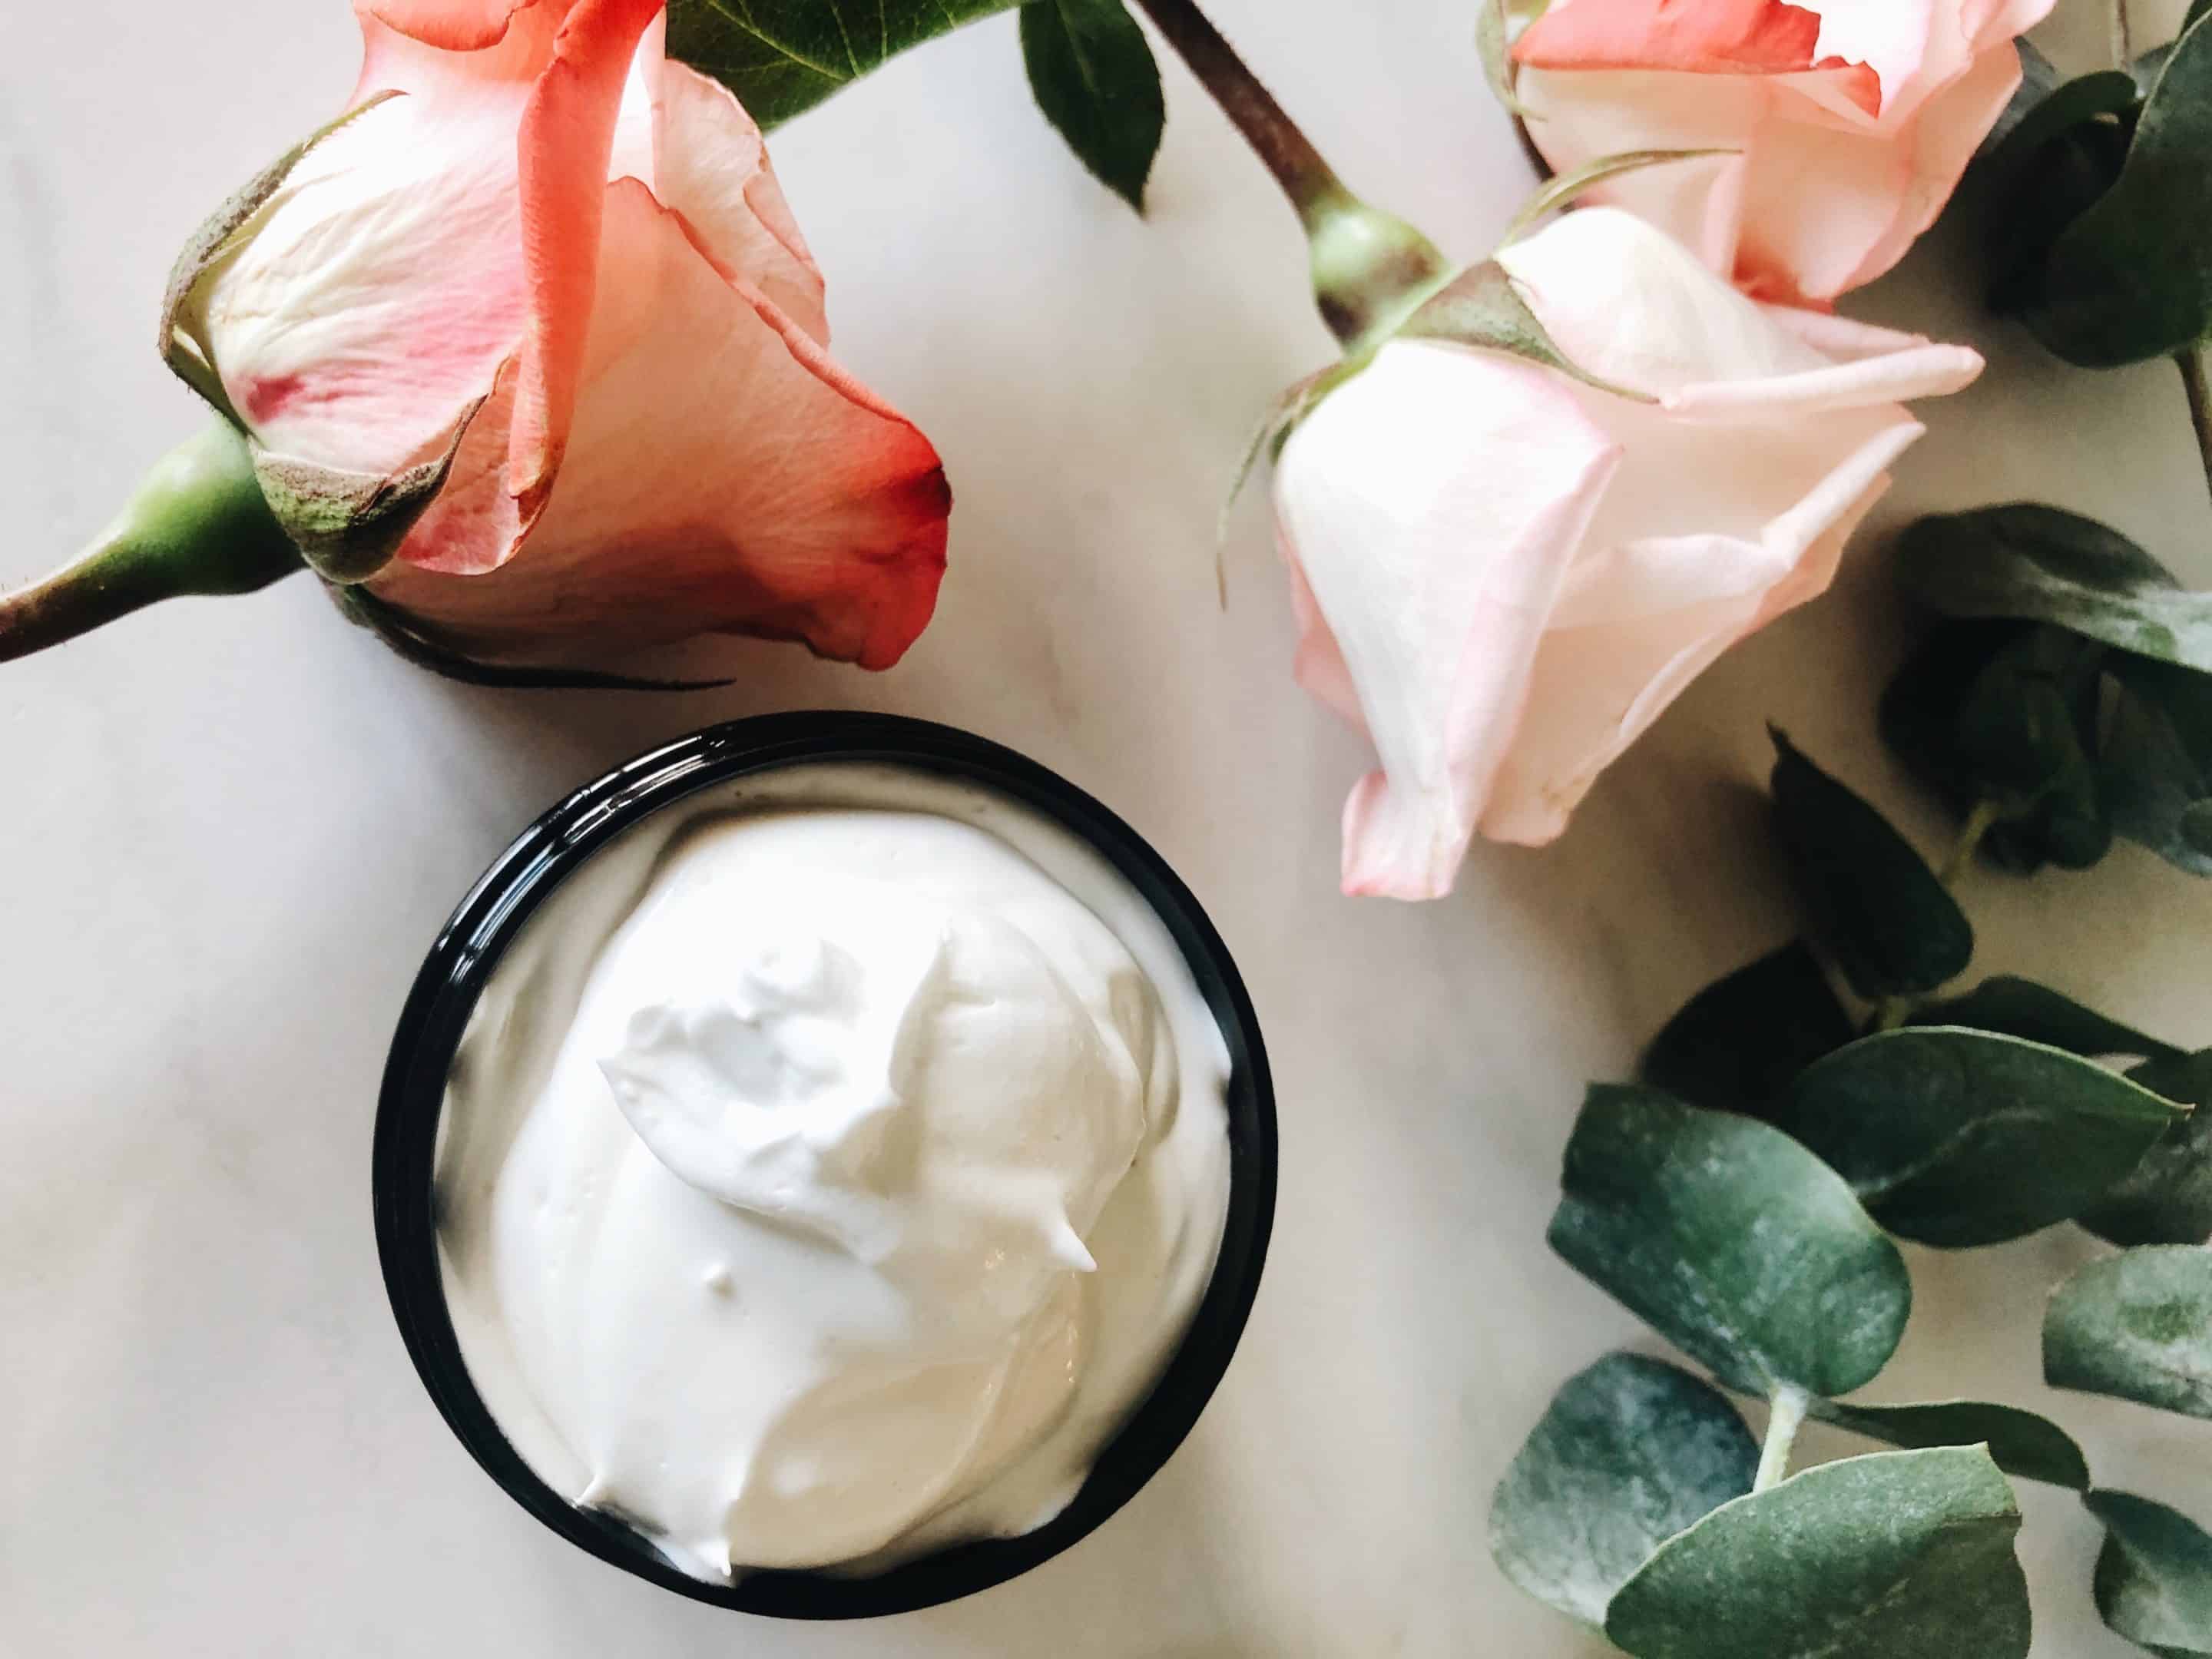 Homemade Body Butter with Rosemary & Shea Butter (with video tutorial)